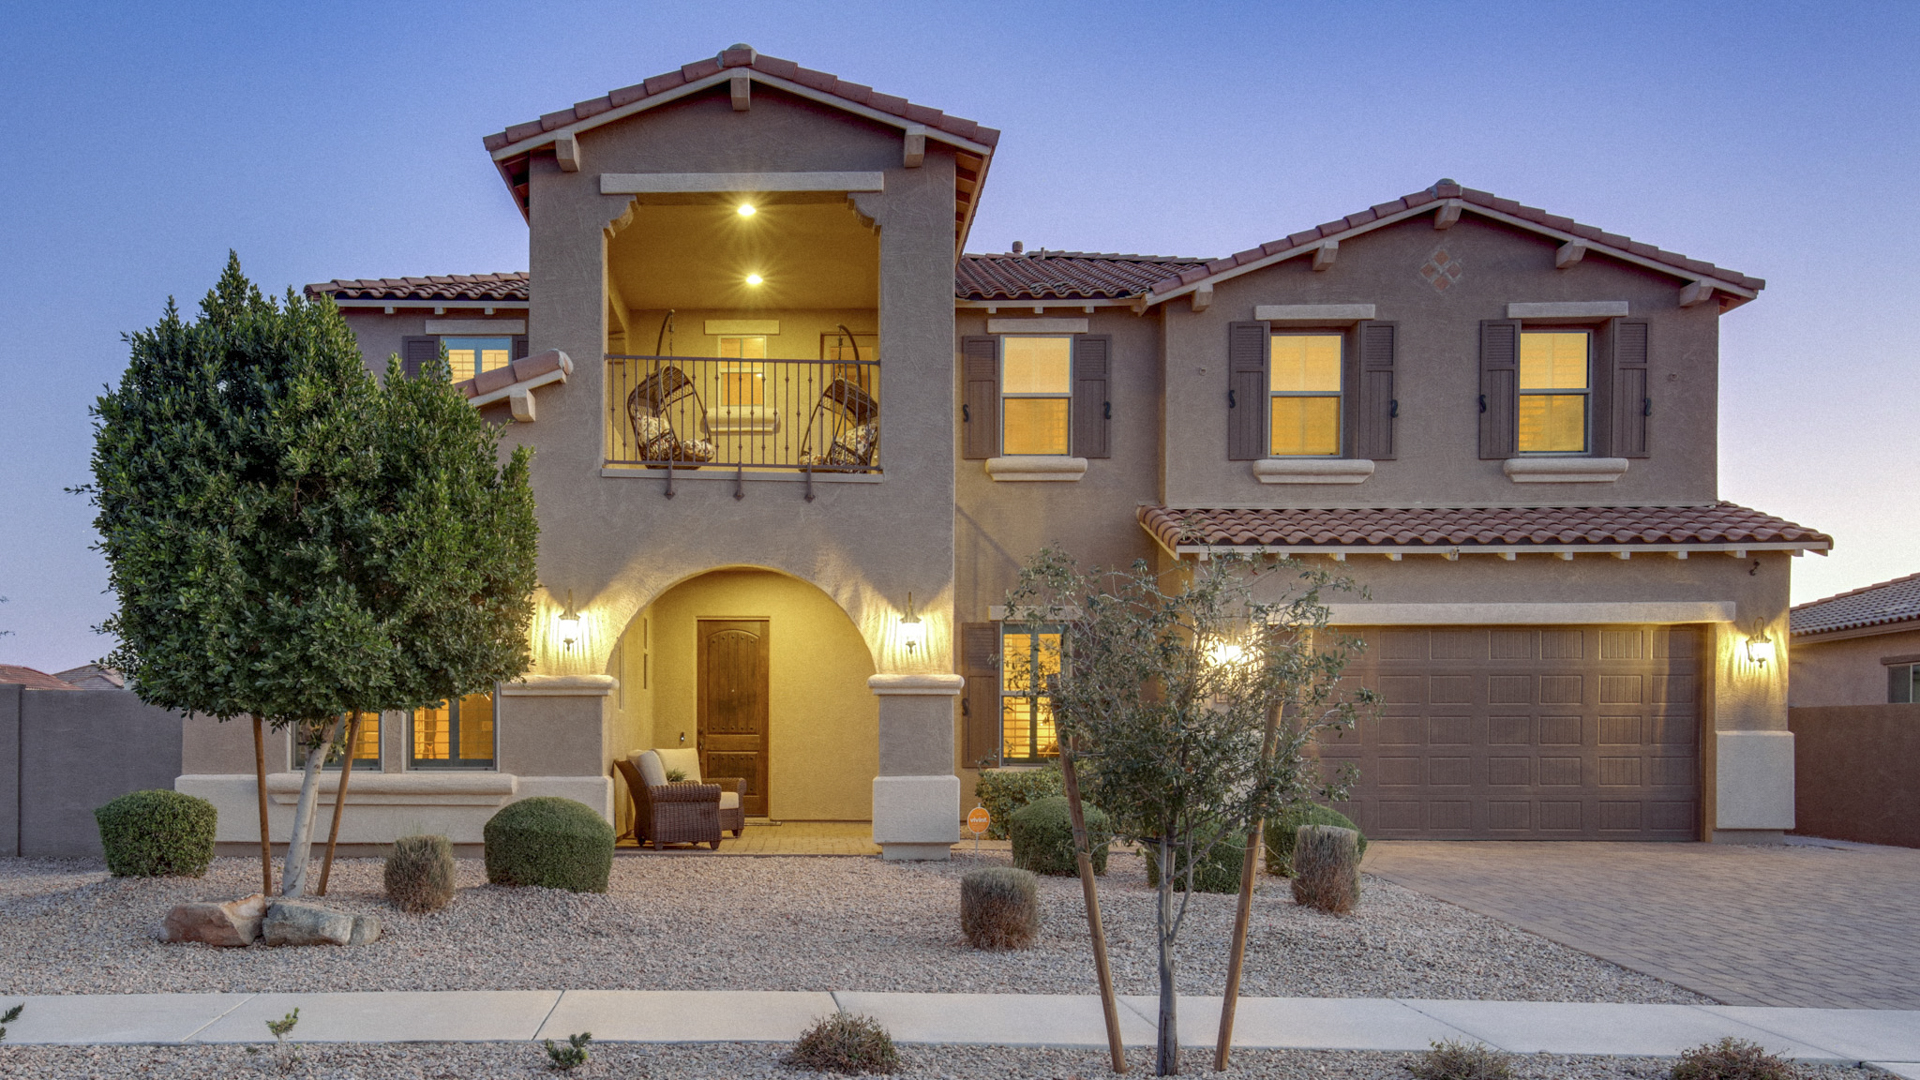 JUST LISTED - 21497 E Caldwells Way, Queen Creek, AZ 85142 - Hastings Farms | Amy Jones Group